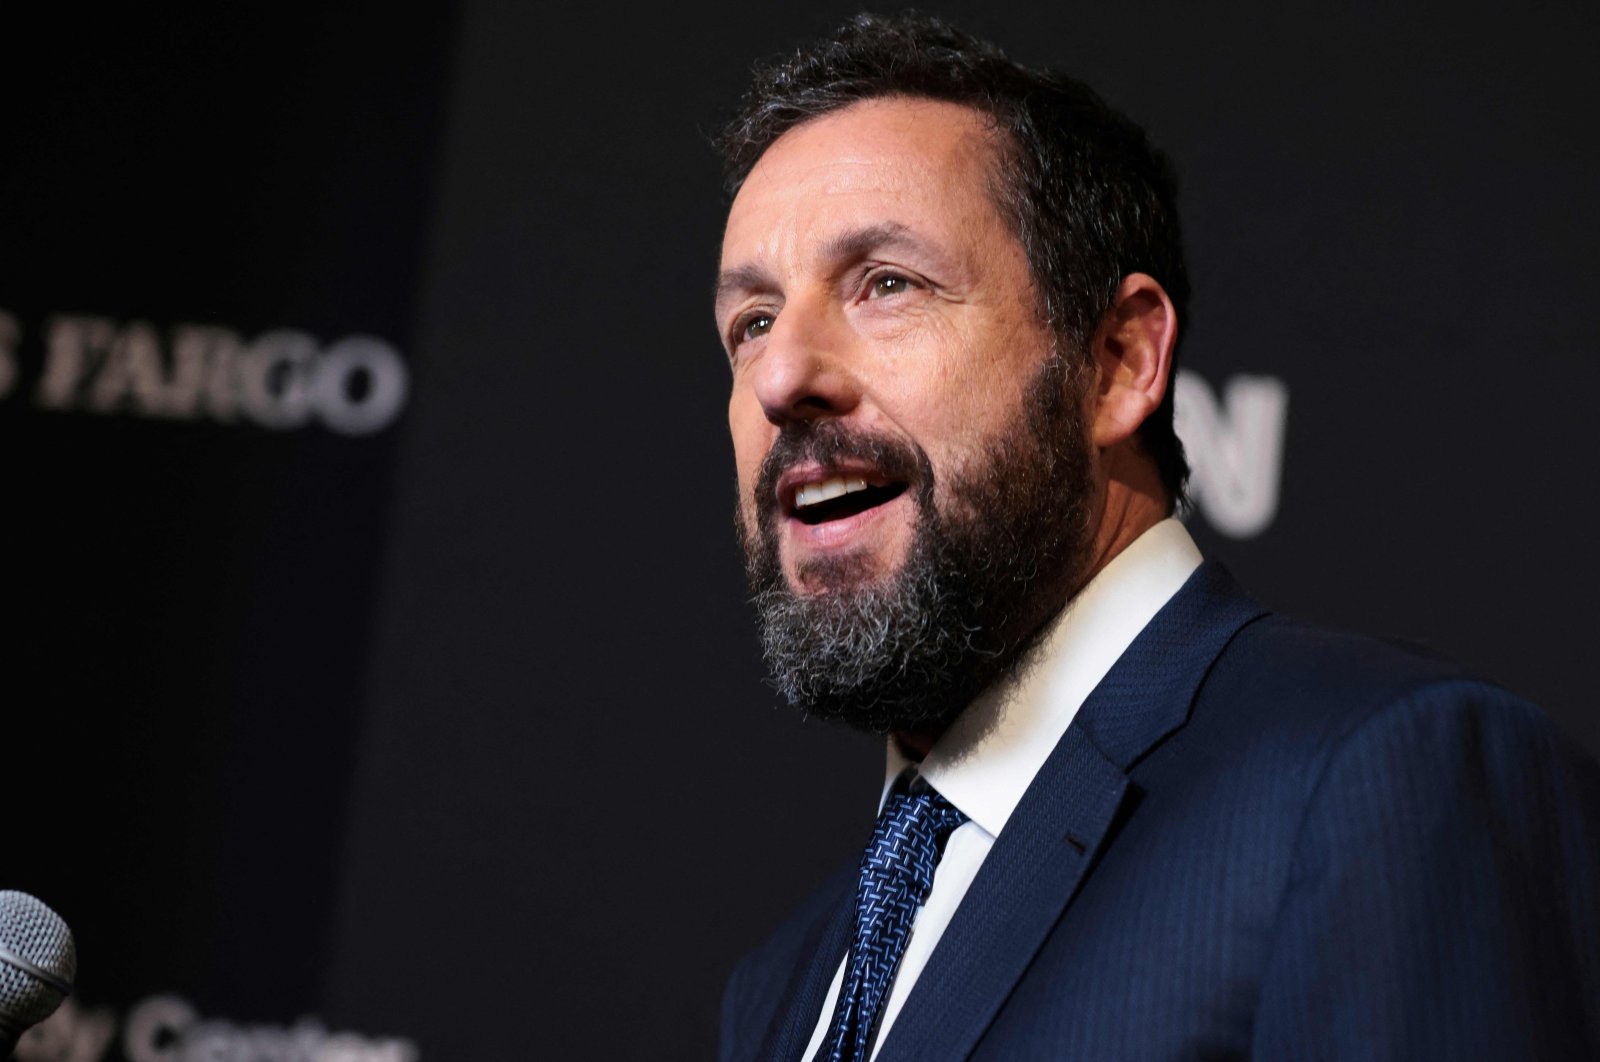 U.S. actor Adam Sandler arrives for the 24th Annual Mark Twain Prize For American Humor at the John F. Kennedy Center for the Performing Arts in Washington, U.S., March 19, 2023. (AFP Photo)